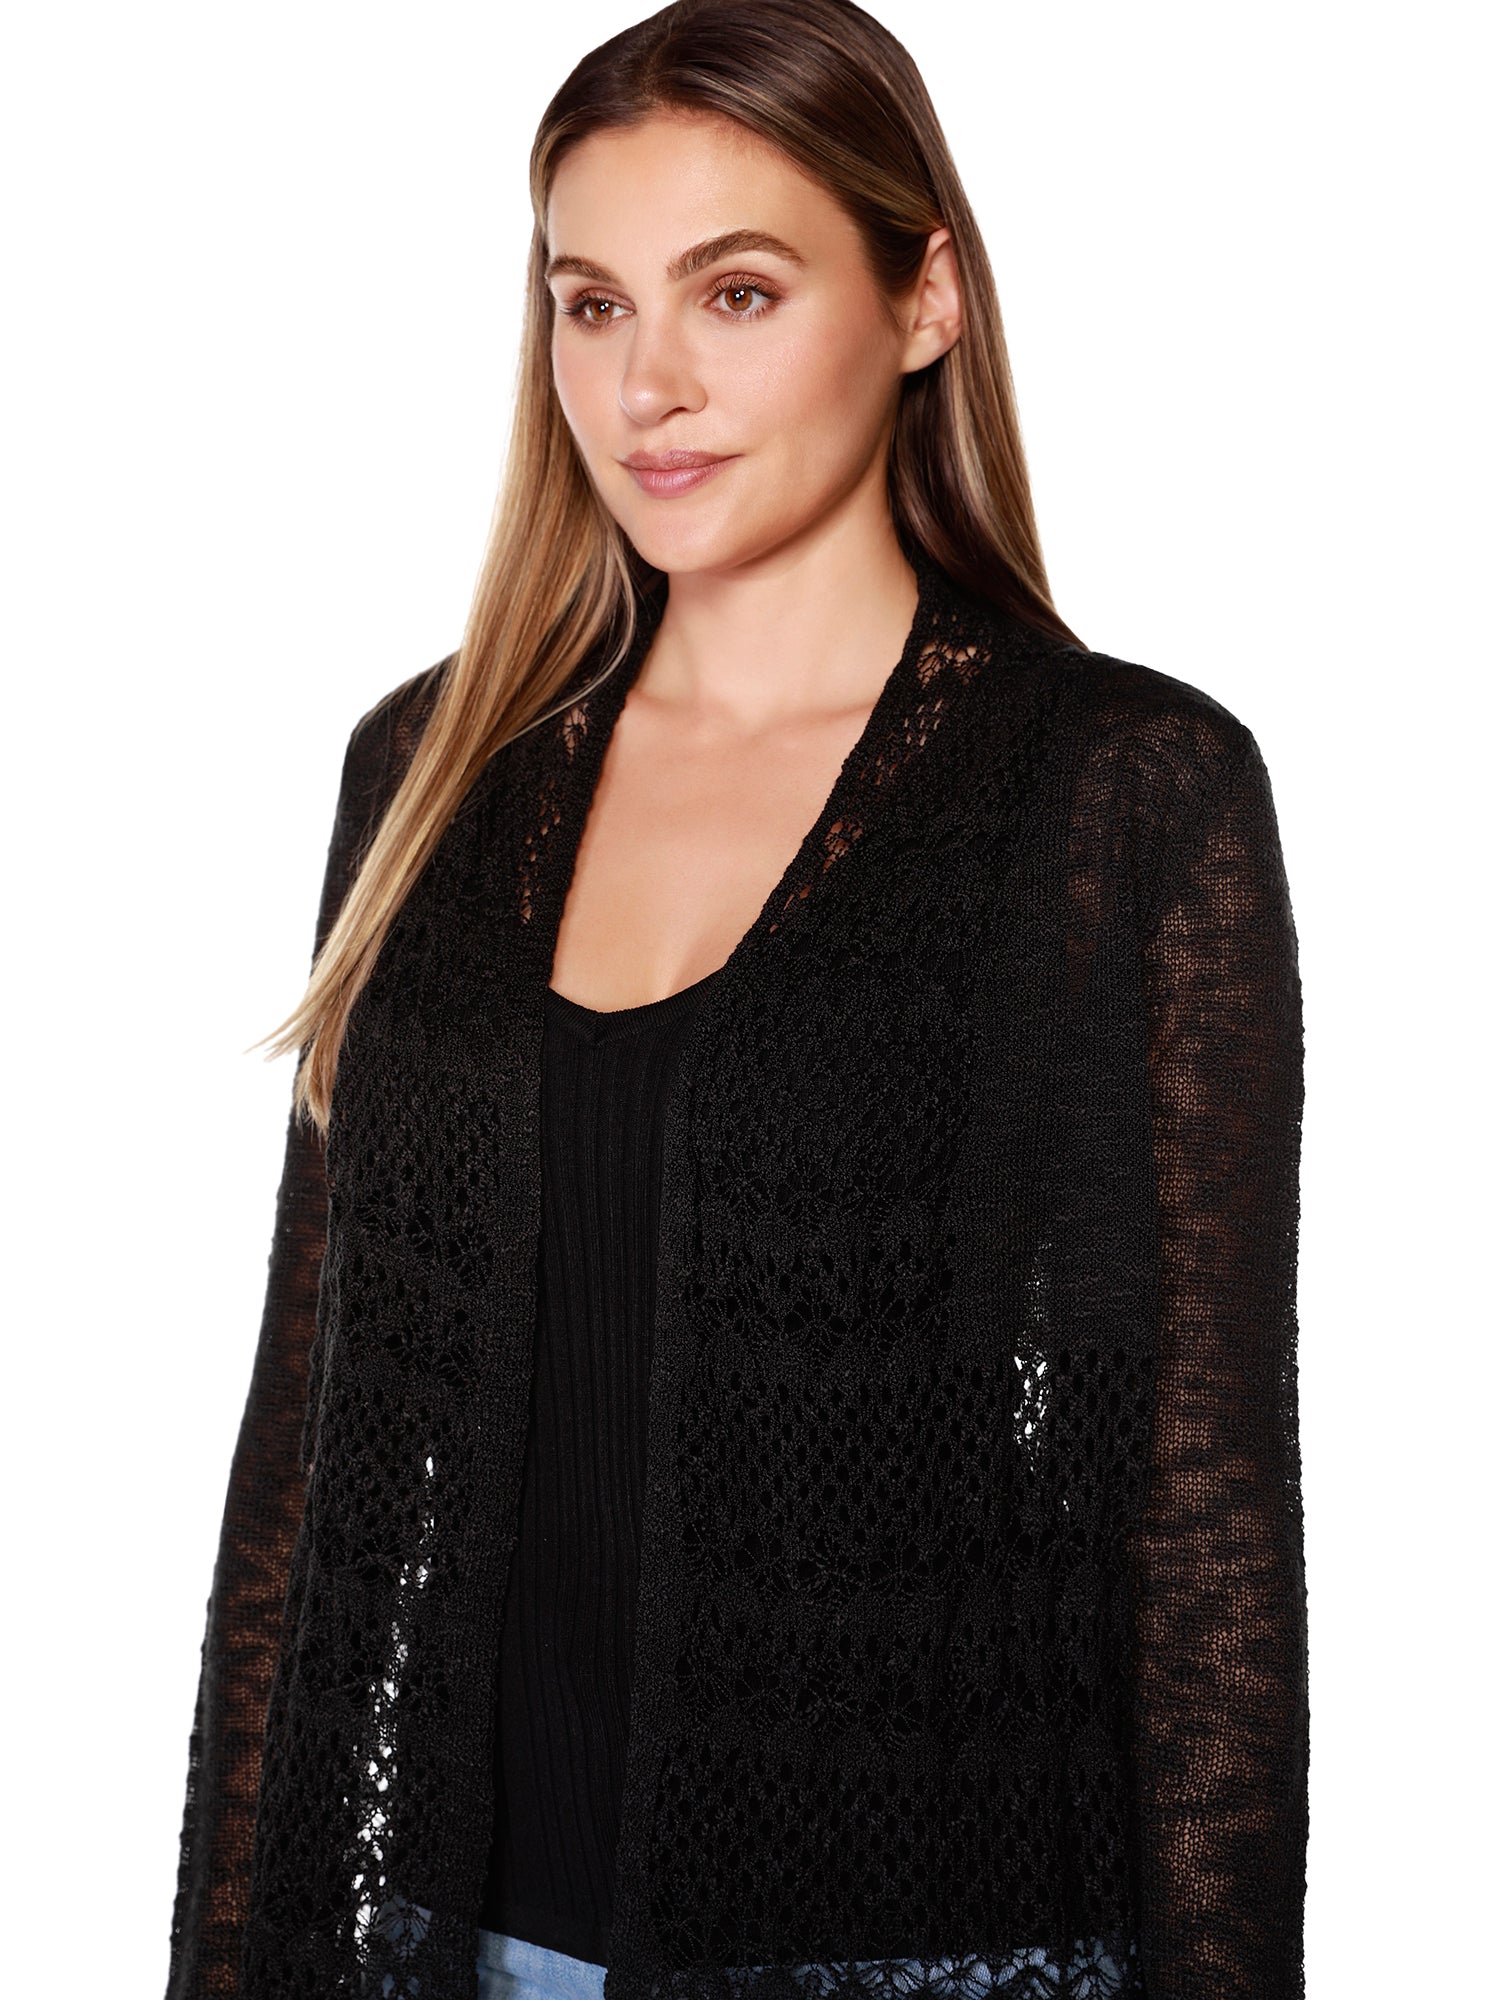 Women's Long Sleeve Crochet Swing Cardigan with Shawl Collar in a Soft Knit